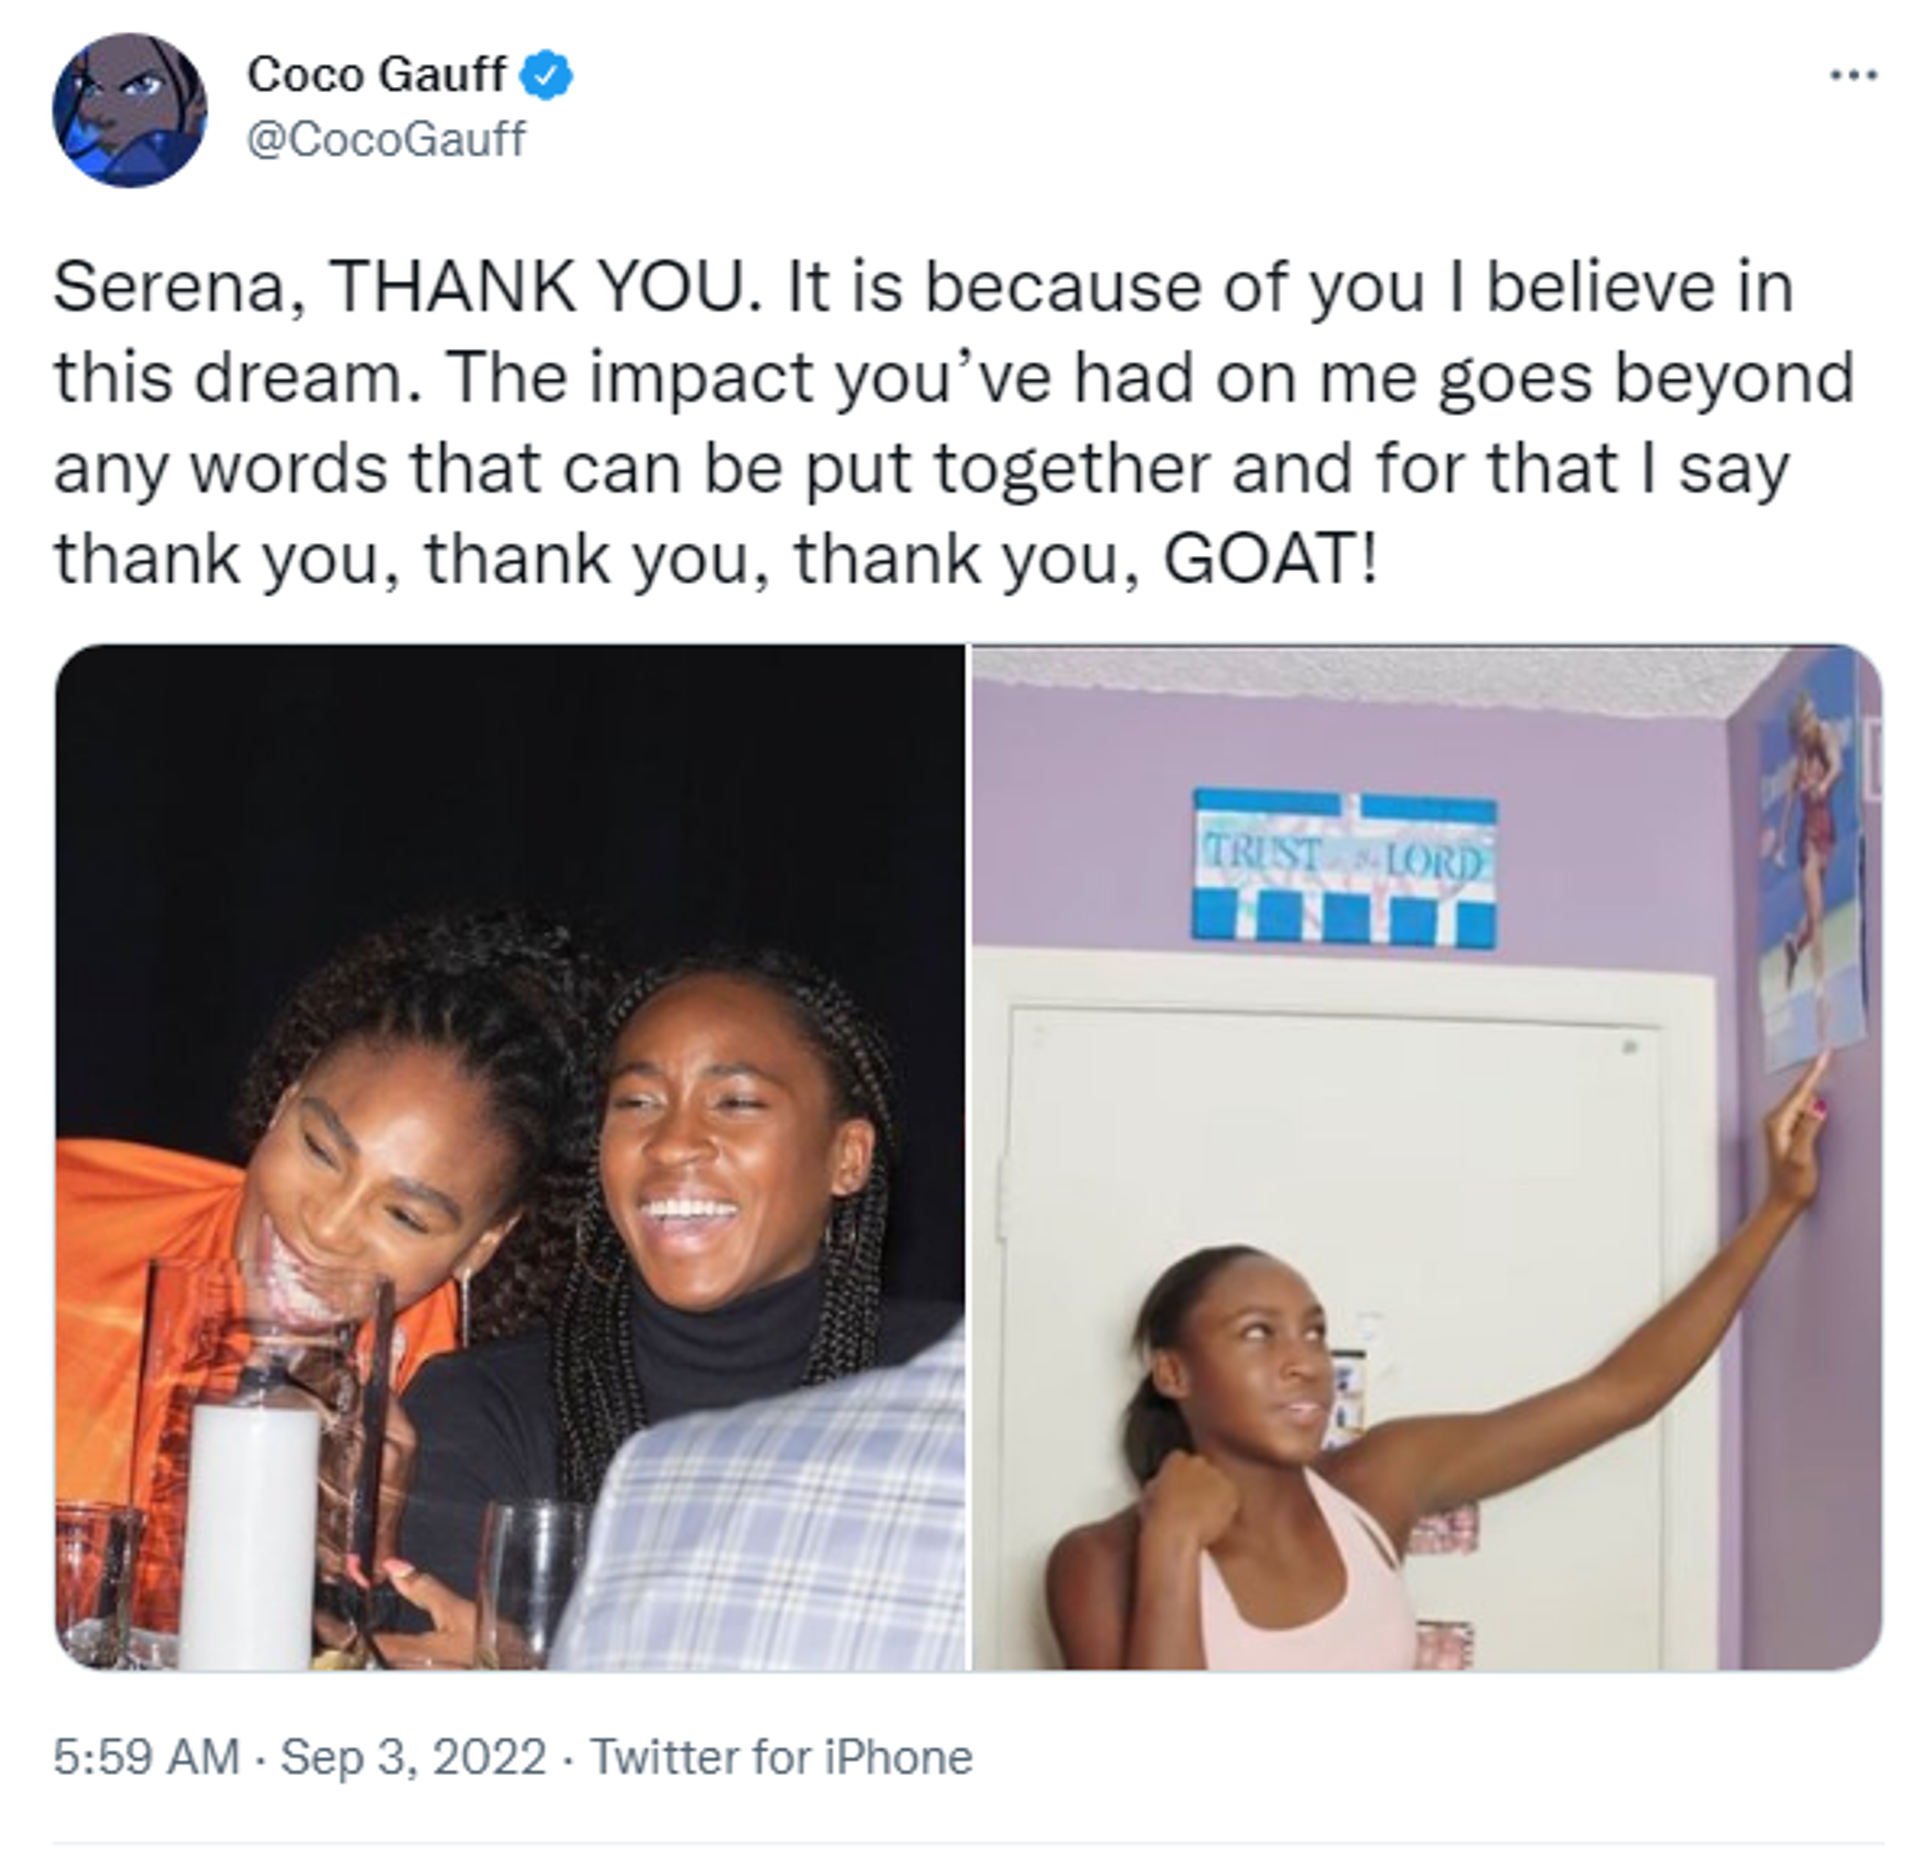 A screenshot of a tweet by tennis player Coco Gauff about the retirement of Serena Williams - Sputnik International, 1920, 03.09.2022